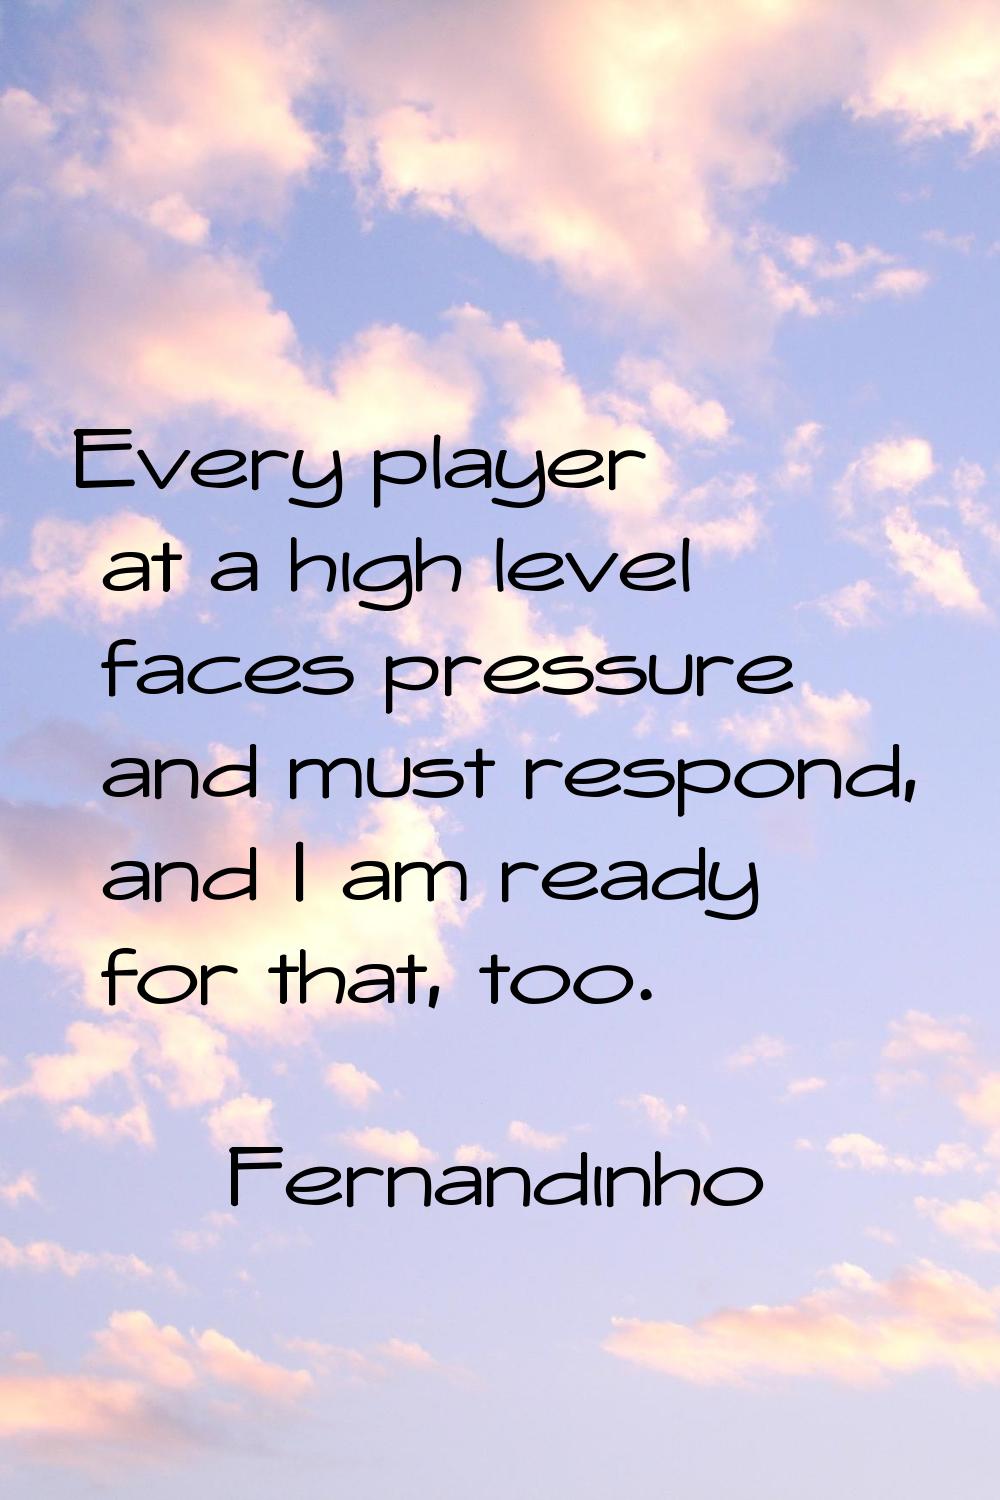 Every player at a high level faces pressure and must respond, and I am ready for that, too.